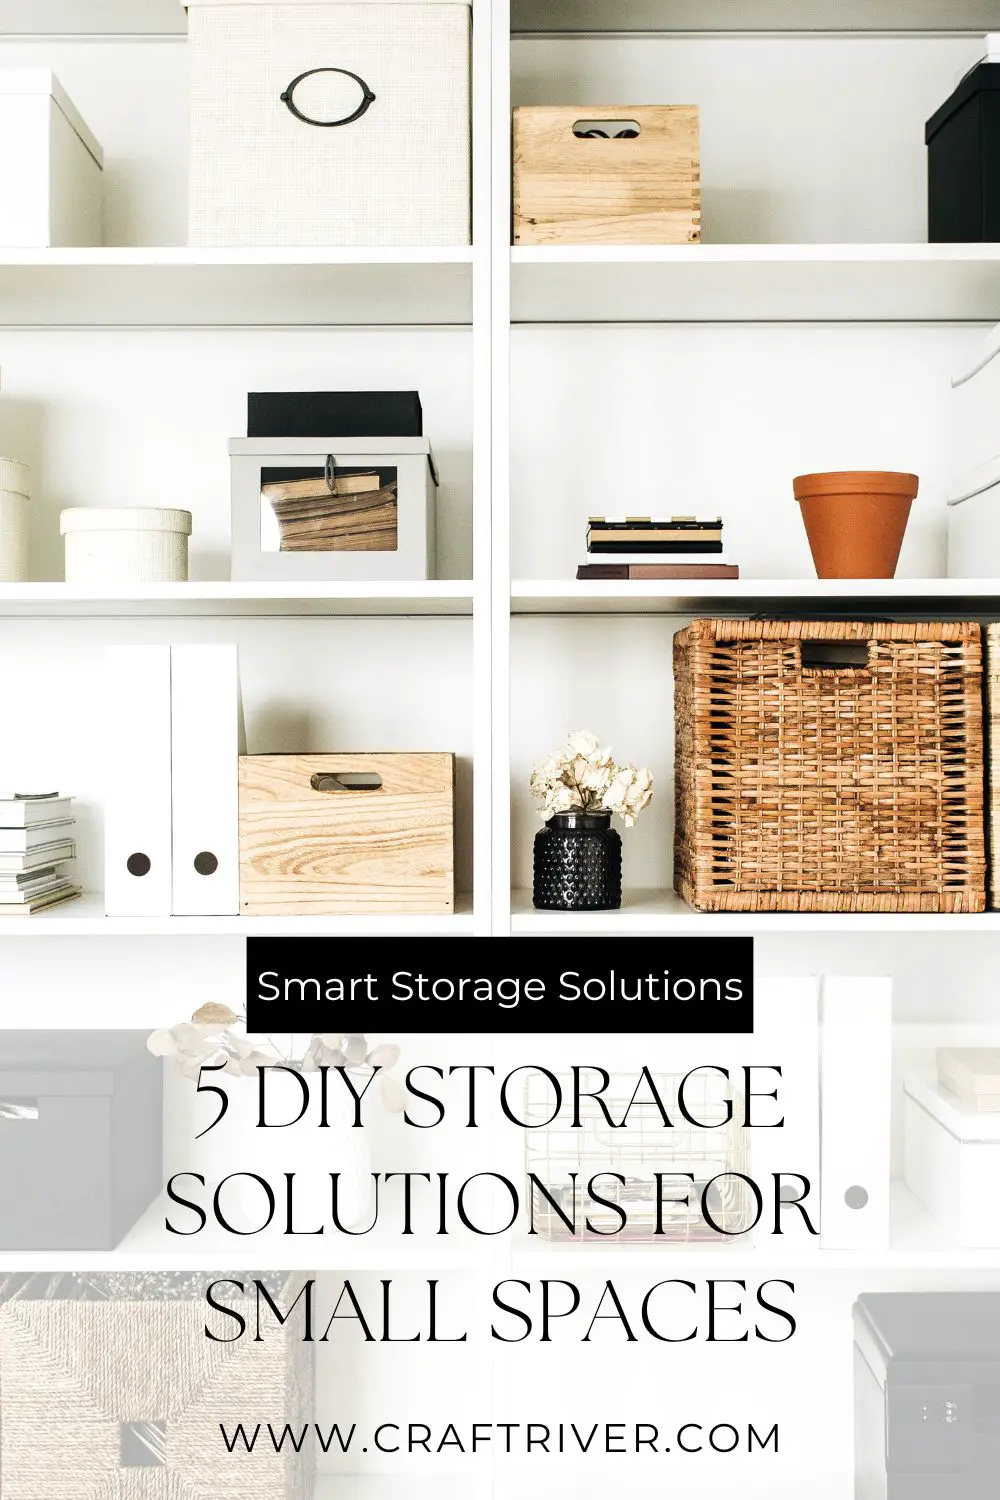 DIY Storage Solutions for Small SPACES